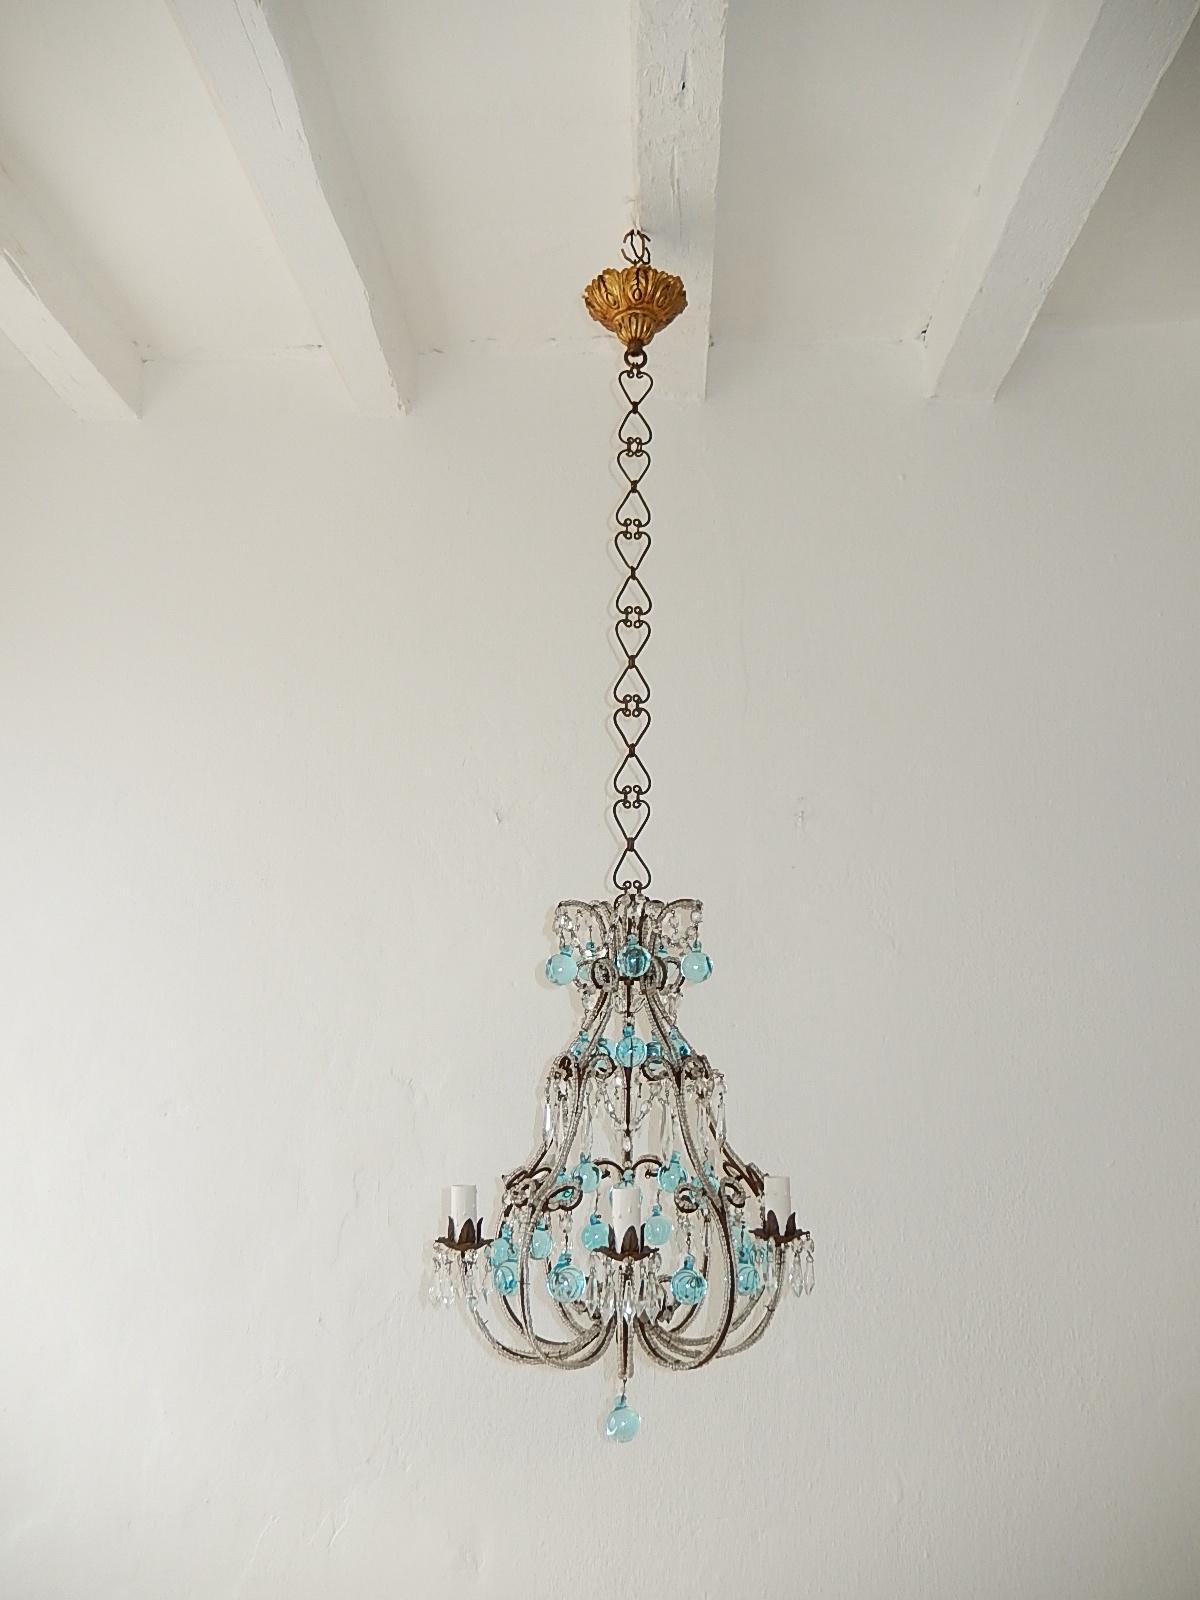 French Aqua Blue Murano Balls Beaded Swags Chandelier, circa 1900 For Sale 4